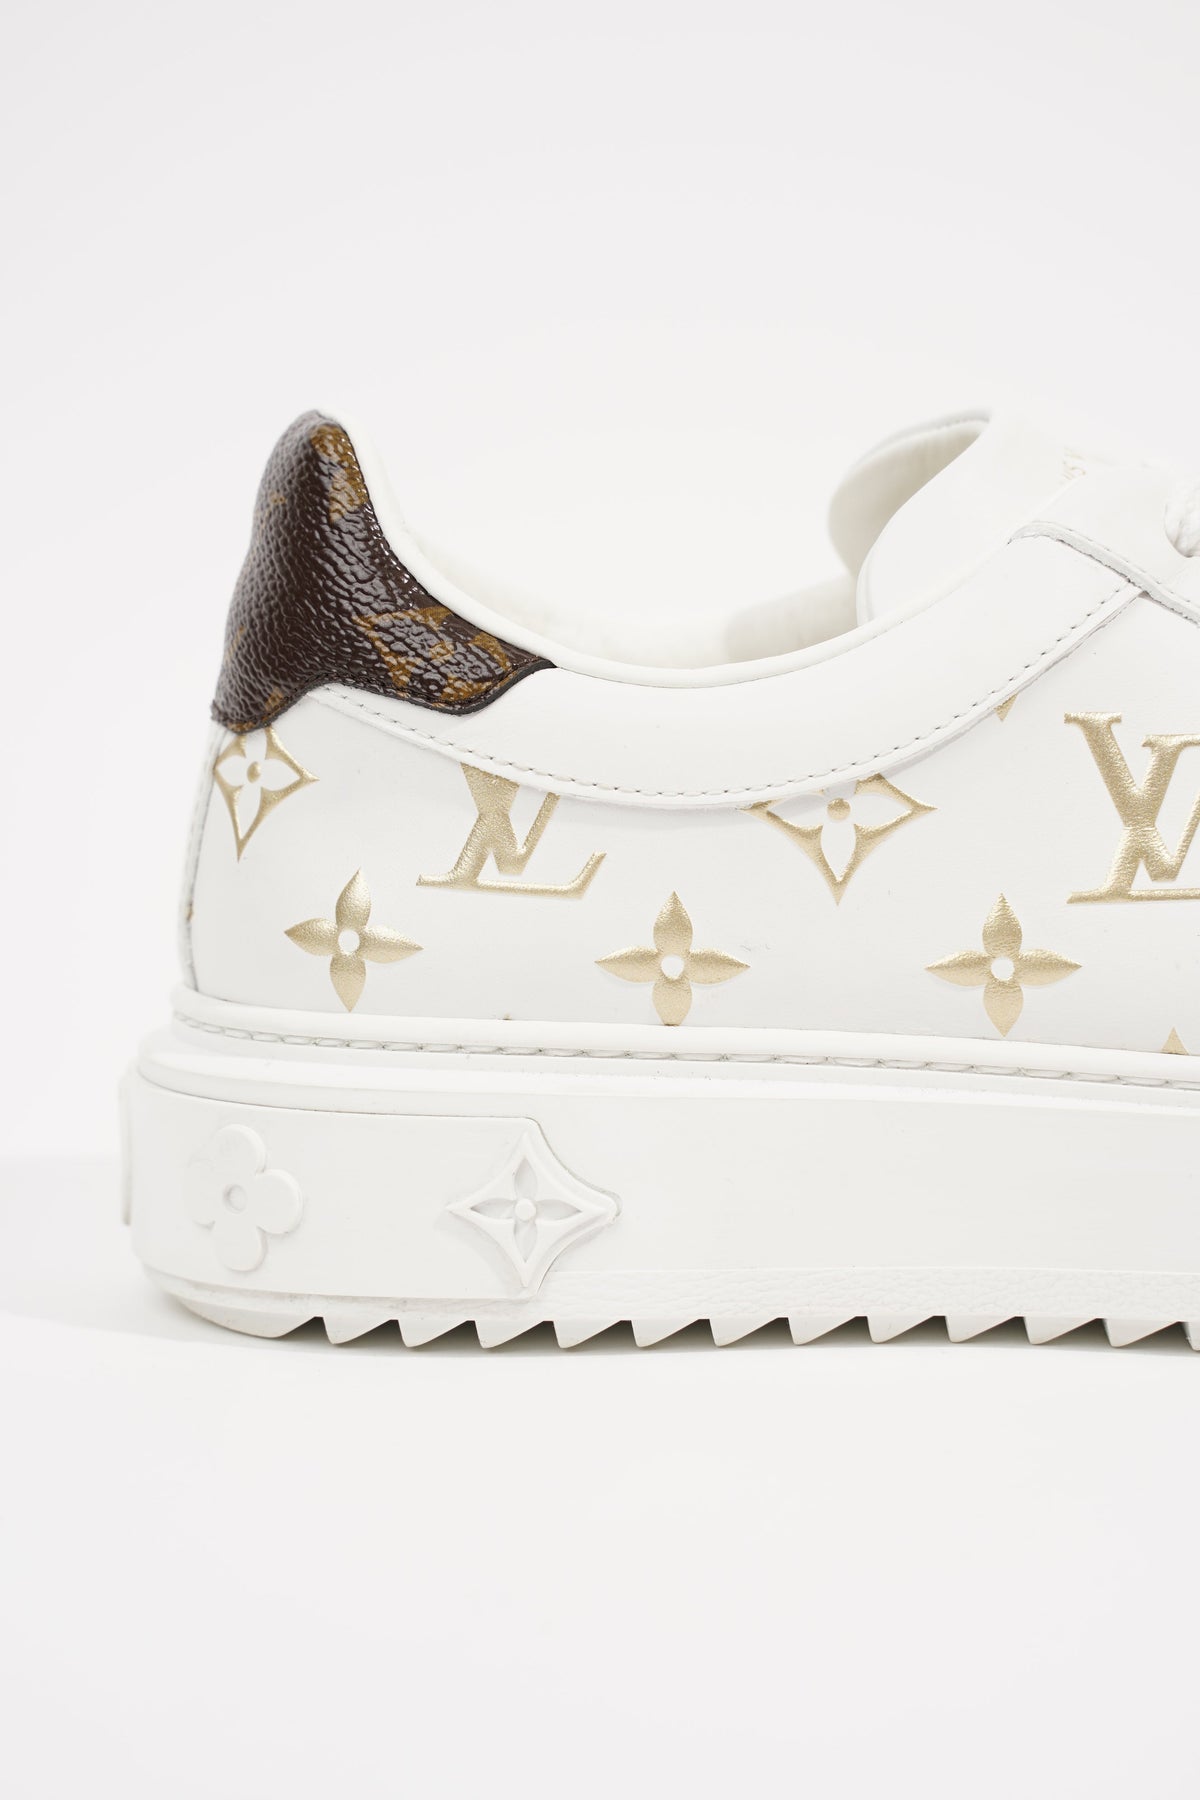 LOUIS VUITTON Calfskin Time Out New Wave Sneakers 40 White 1199358